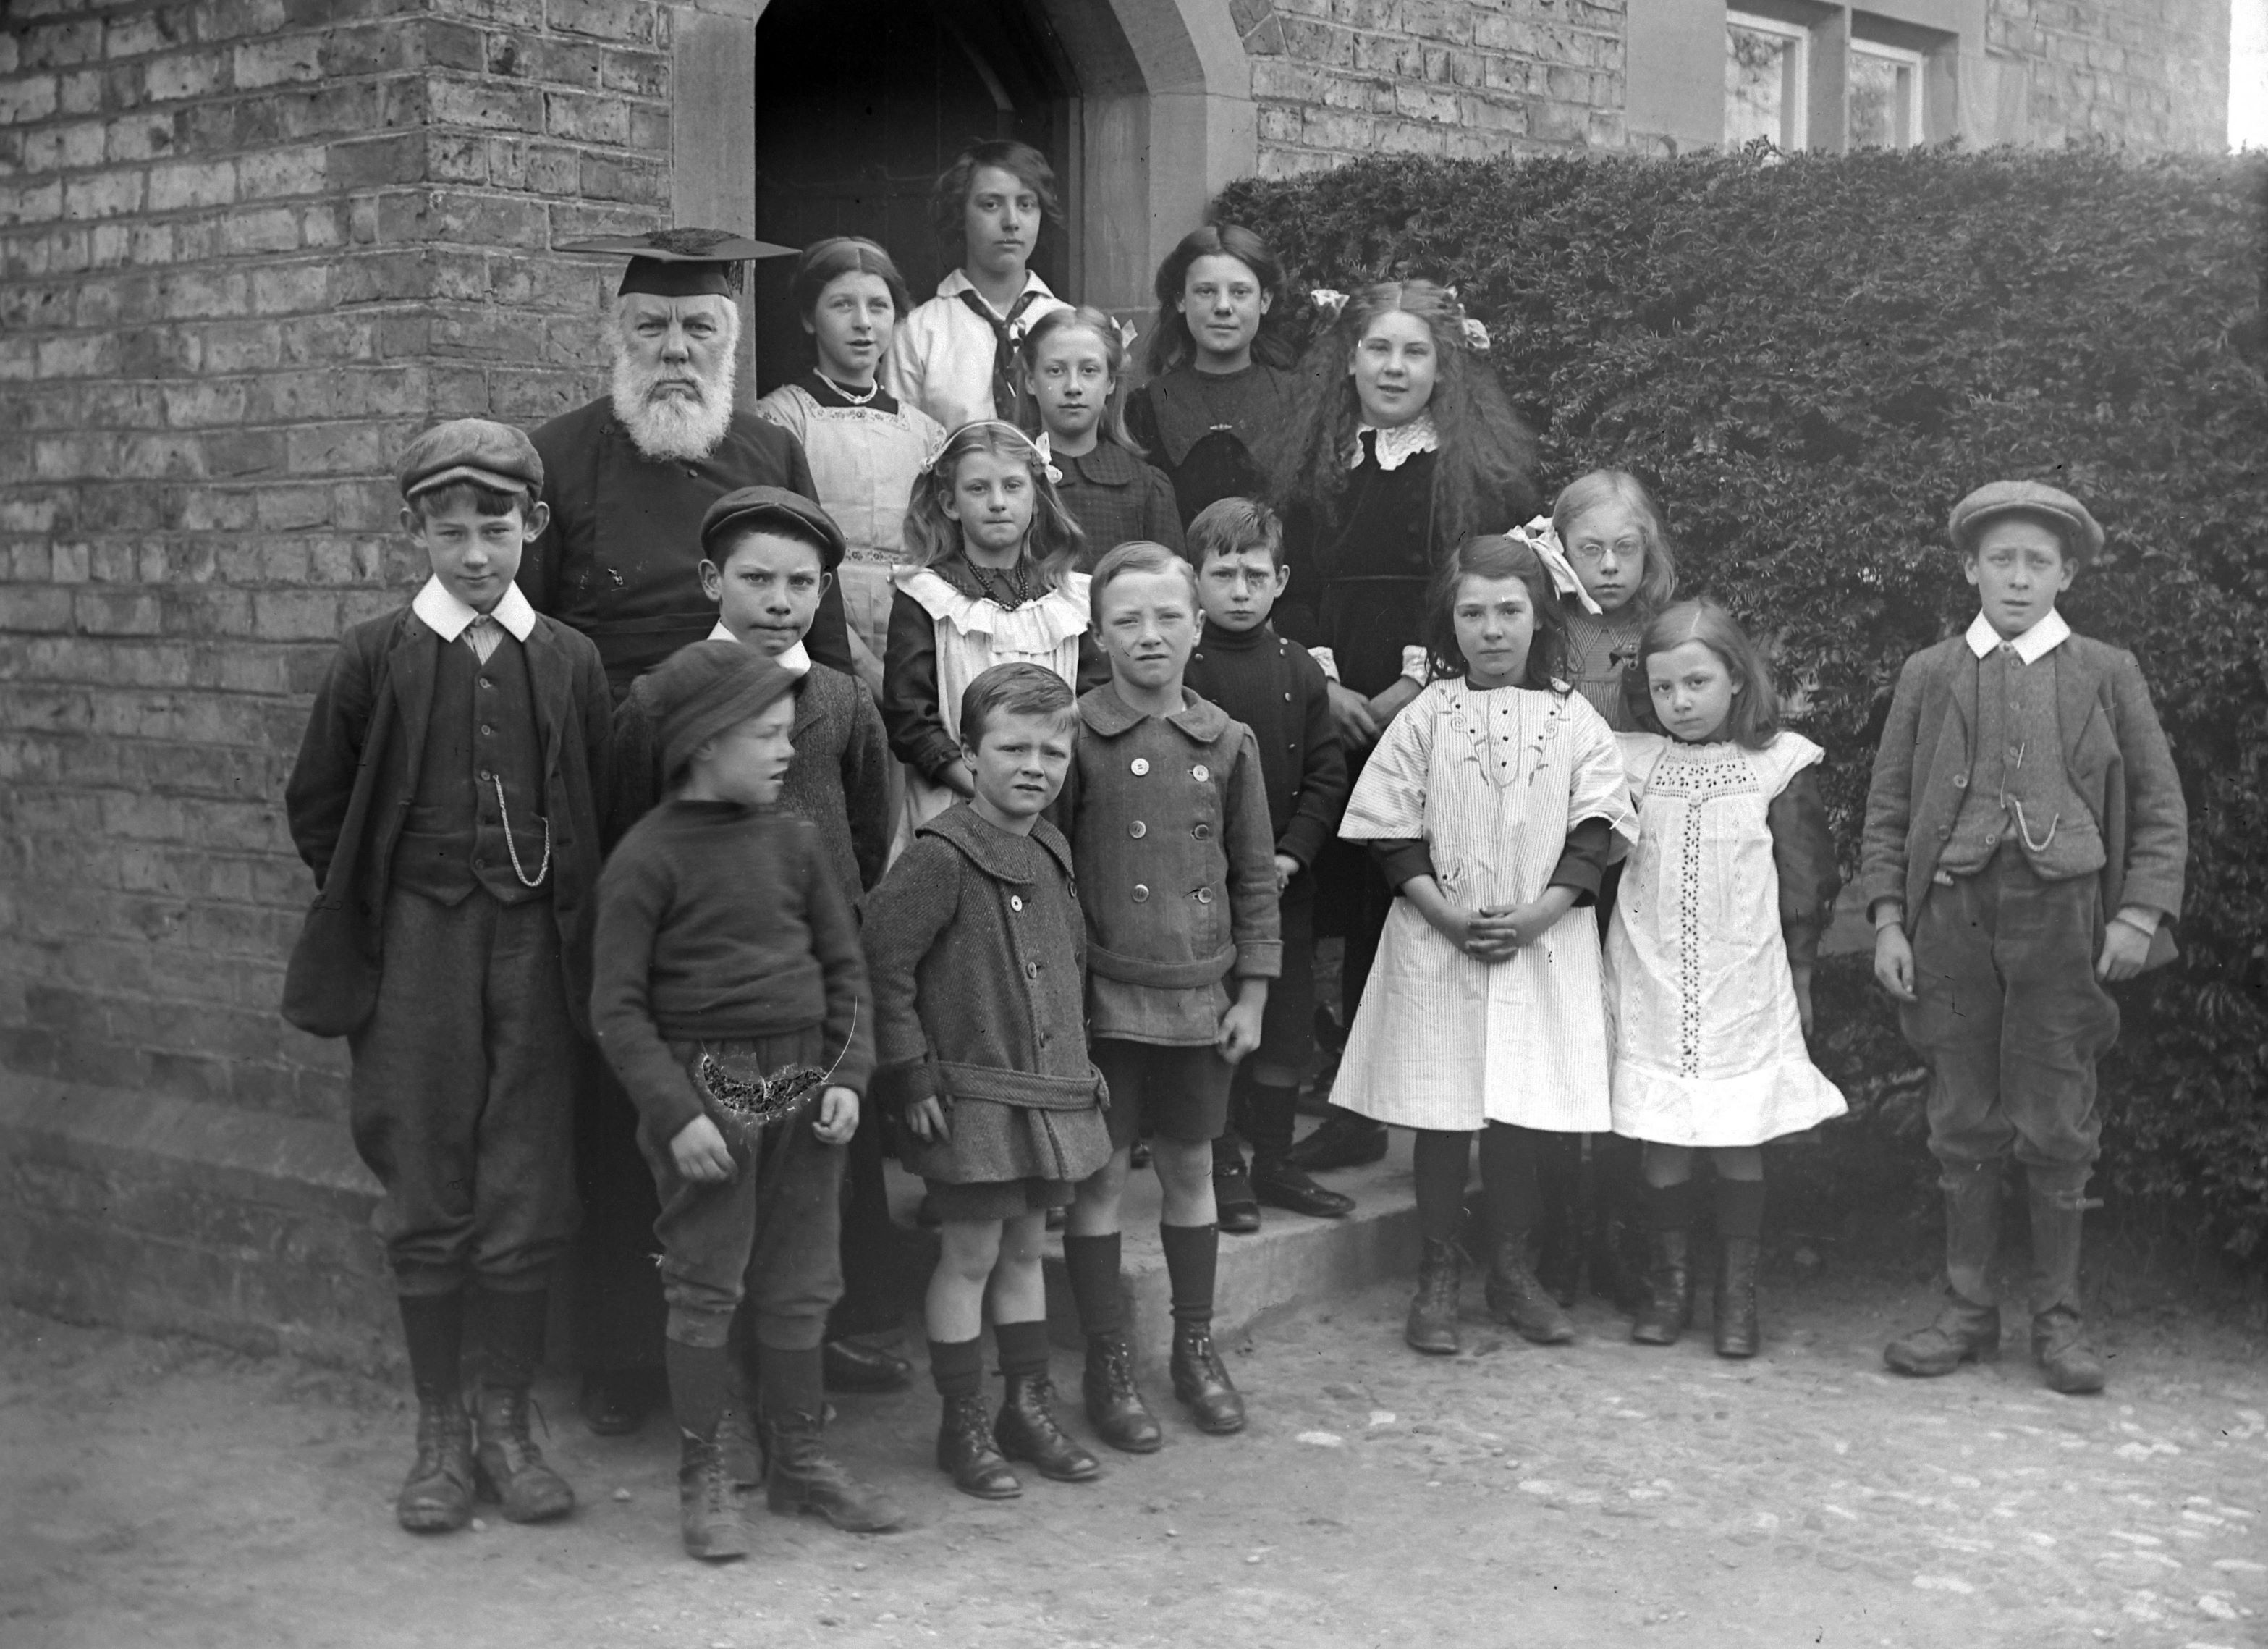 The schoolmaster and pupils of the Dunsforths School in 1915.